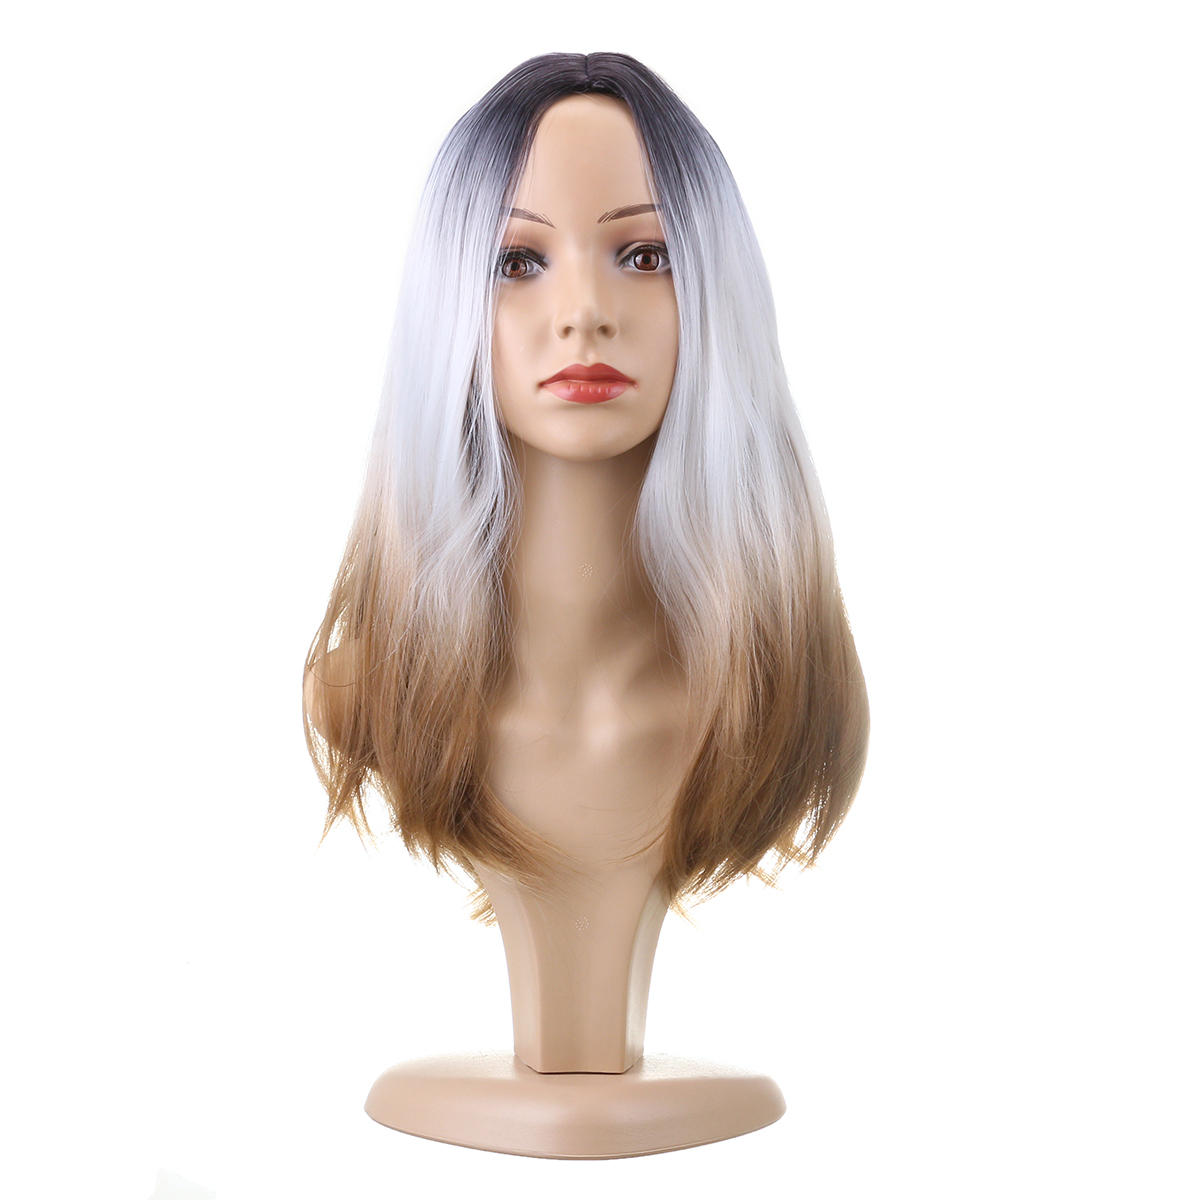 hair 26" 270g Long Synthetic Hair Wig Adjustable Ombre Grey Body Wavy Hair Wigs For Women Cosplay He